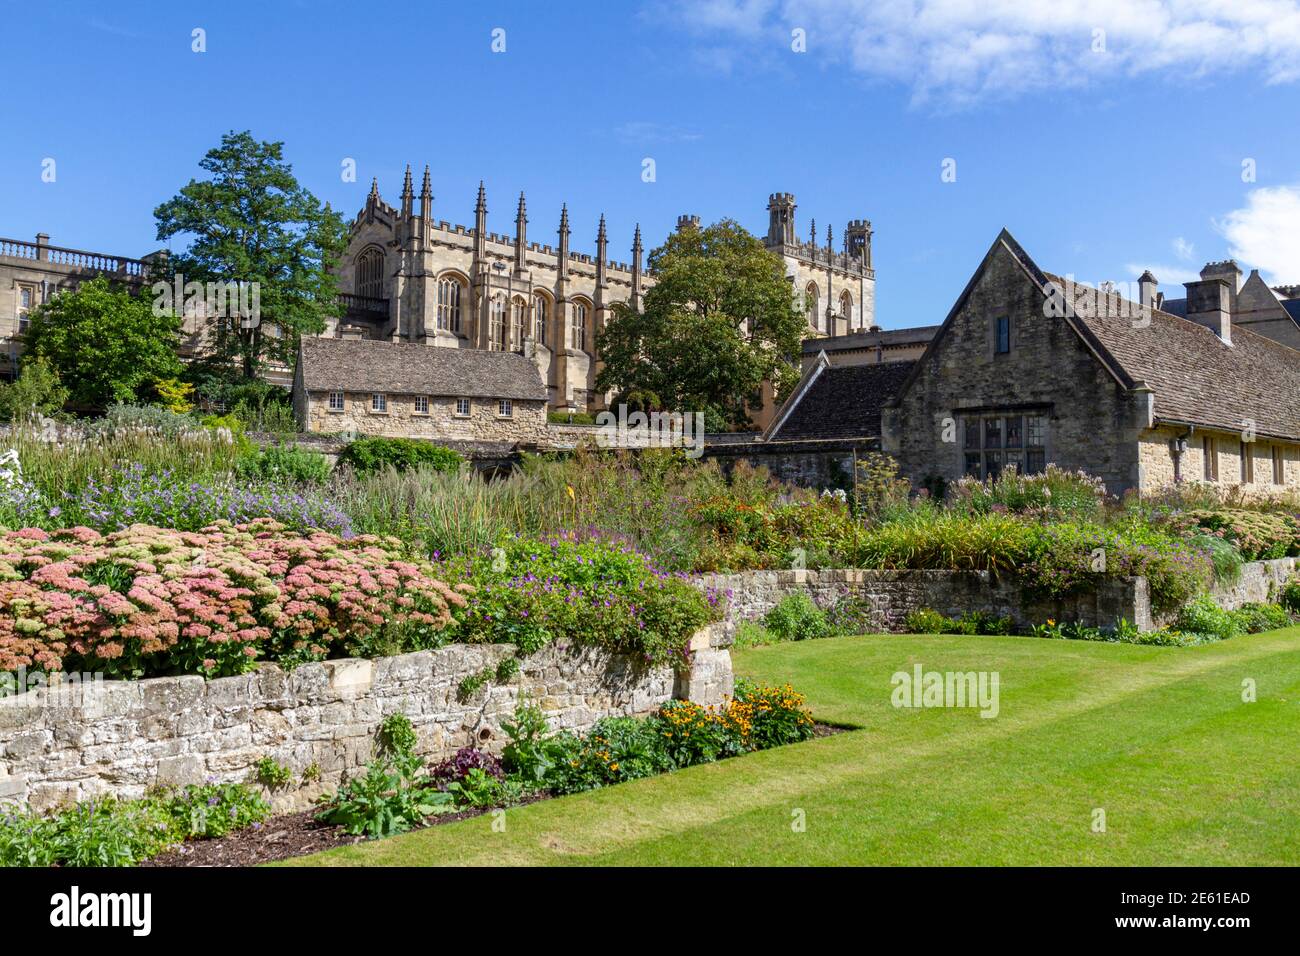 Christ Church College and Memorial Gardens in Oxford, Oxfordshire, UK. Stock Photo